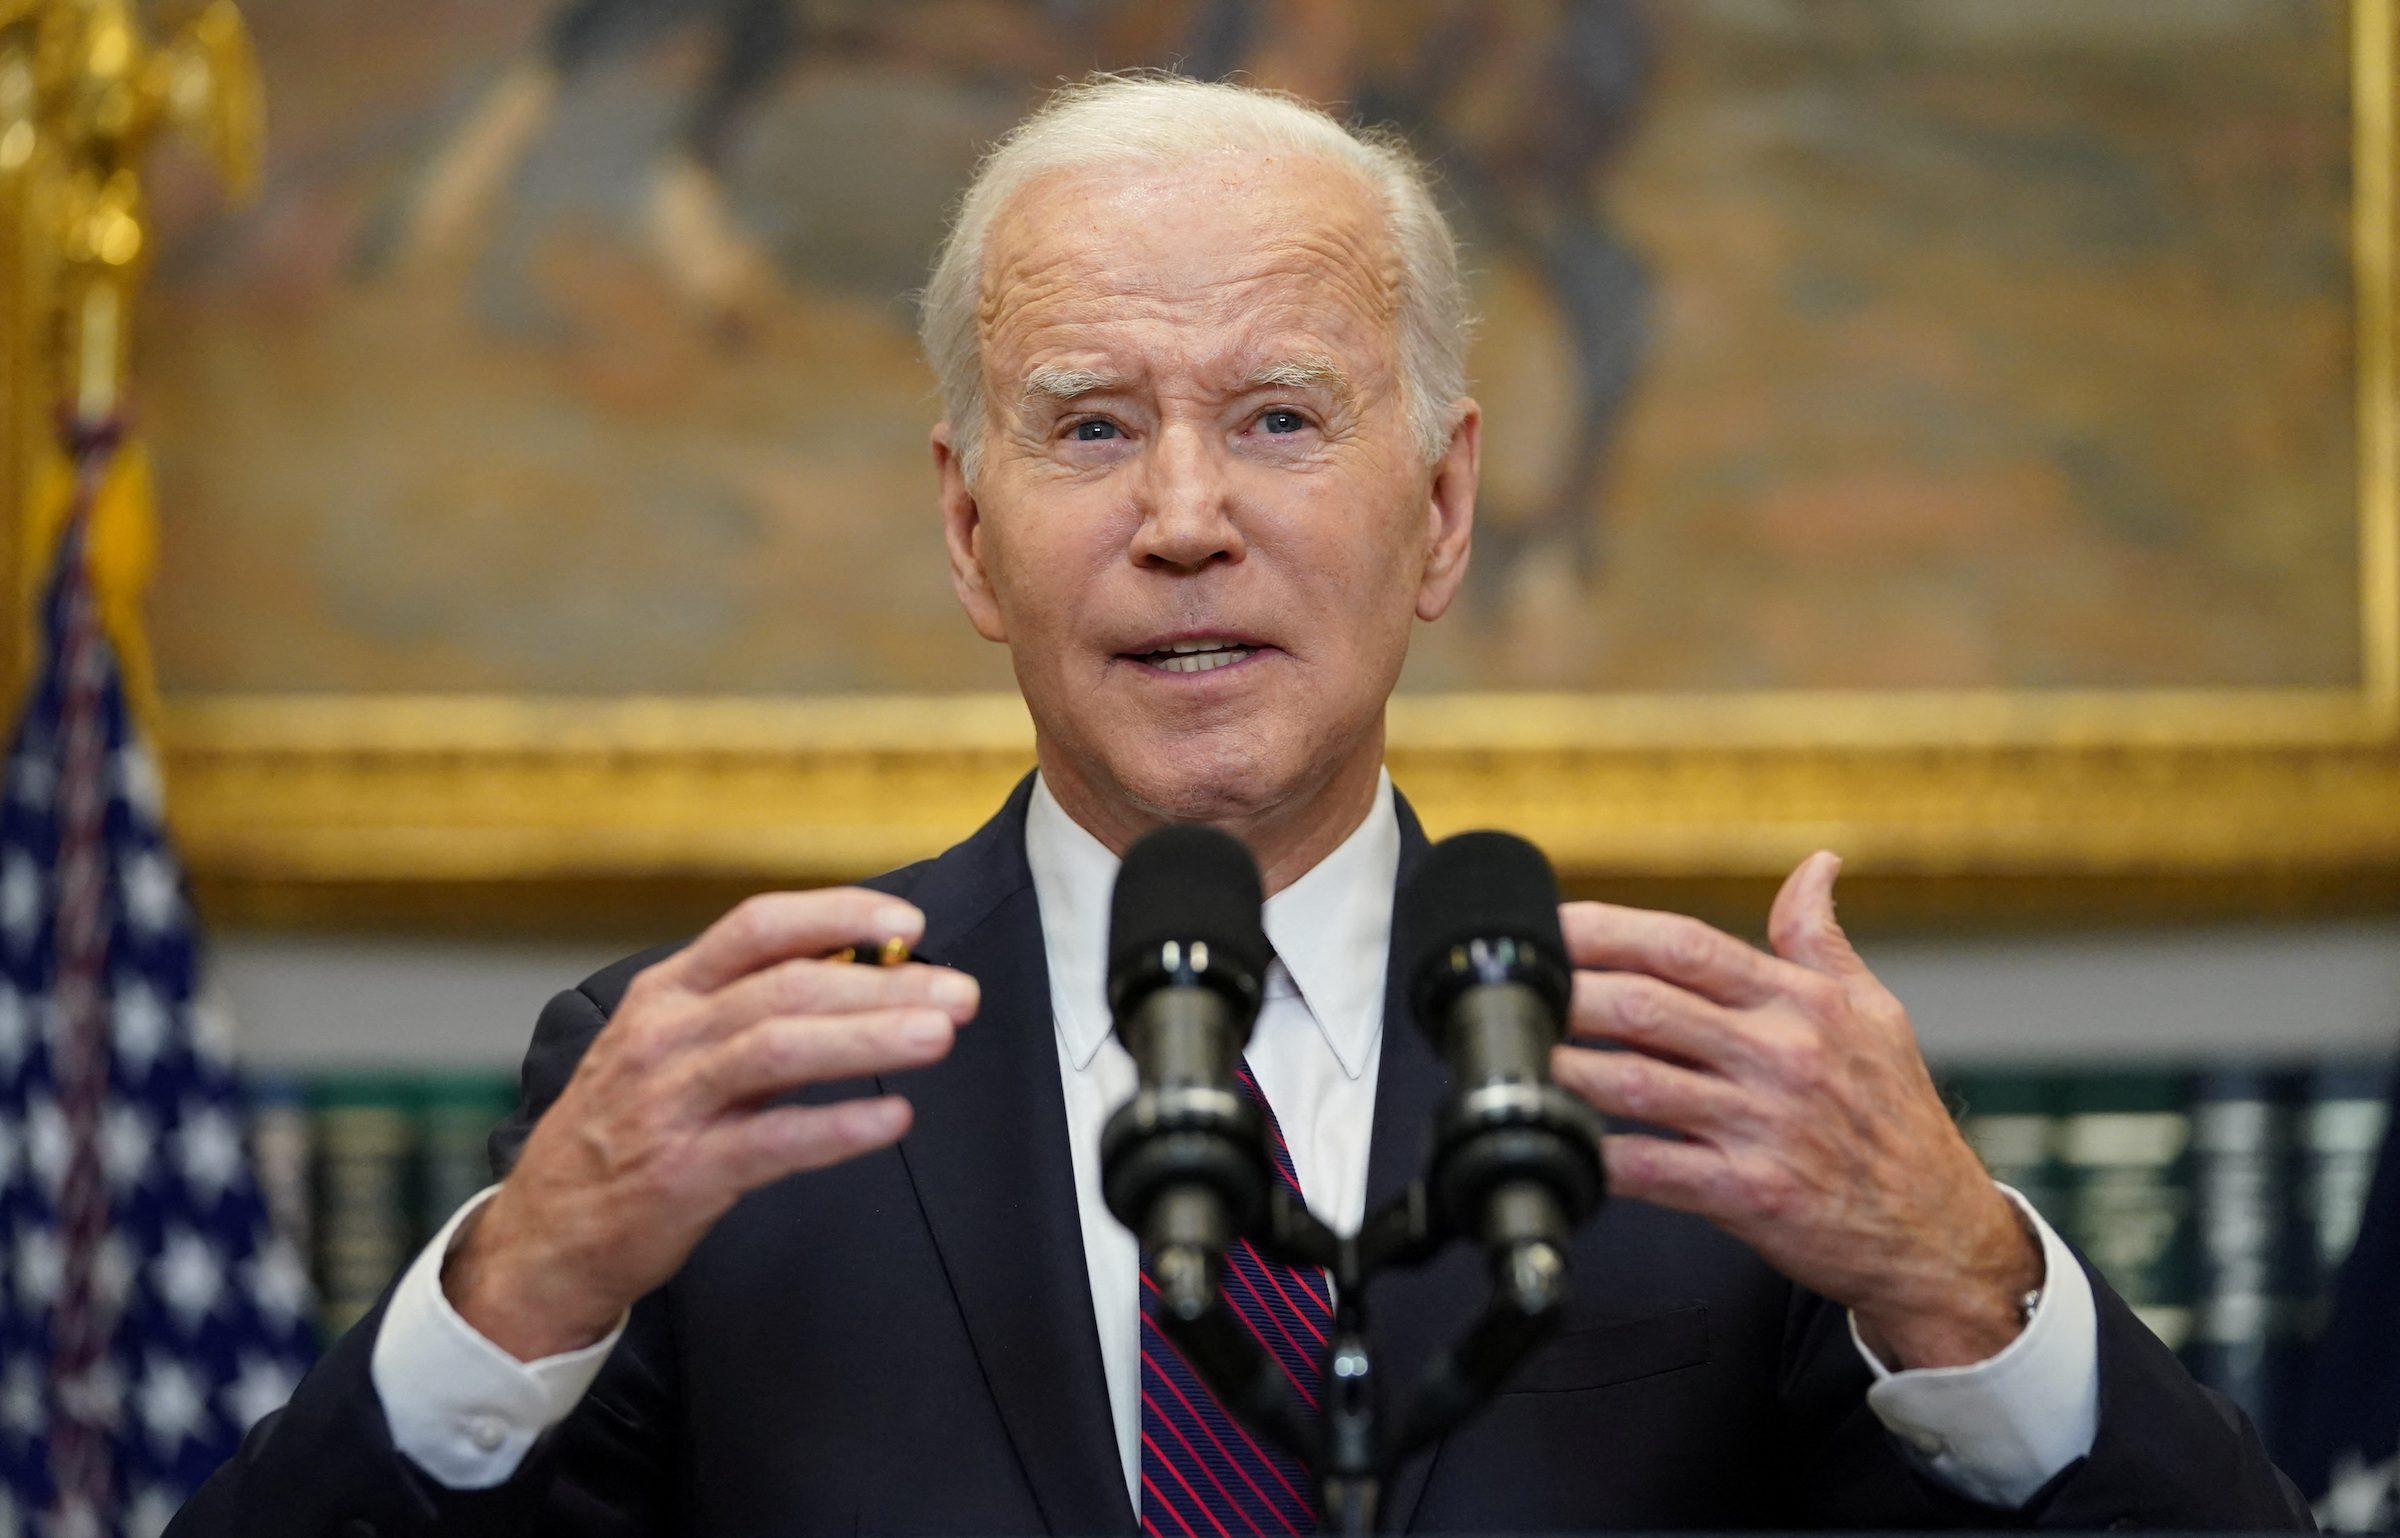 Biden, McCarthy divided over debt ceiling but talks continue